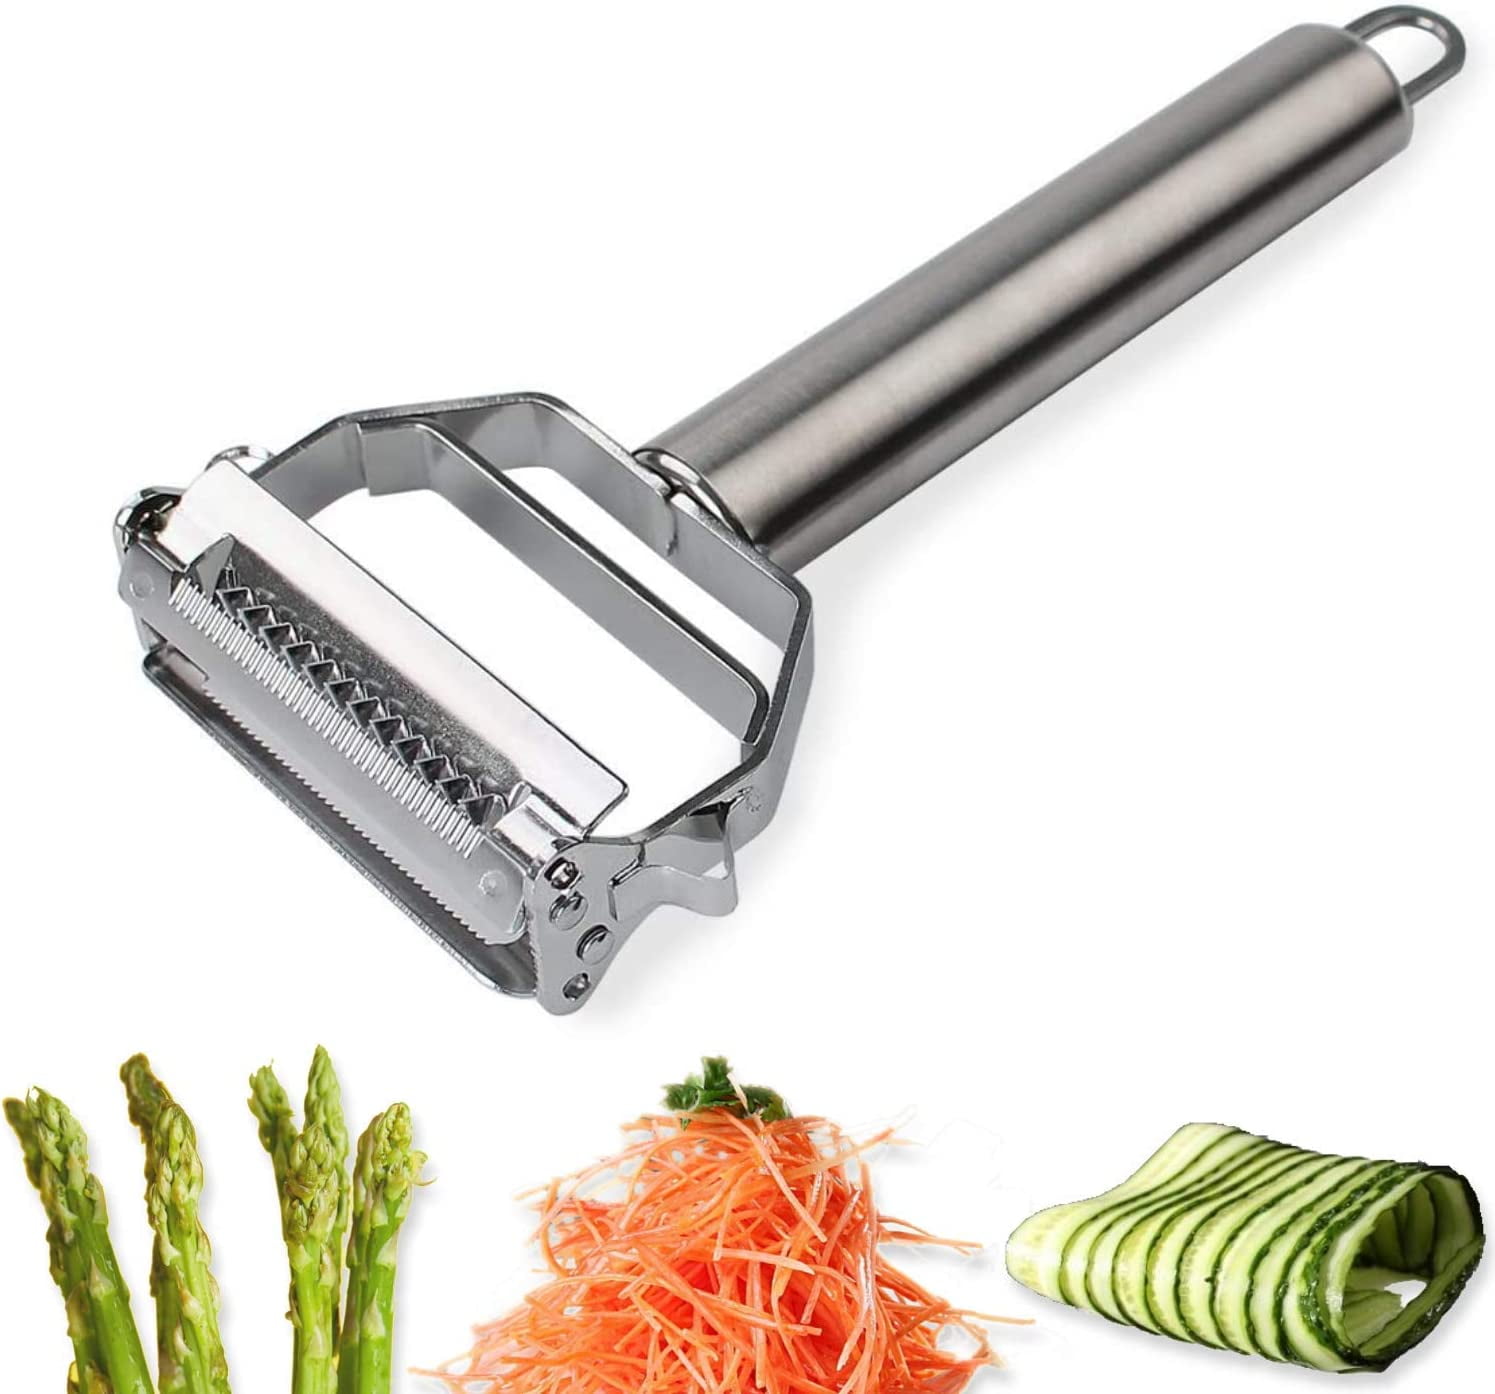 Manual Potato Peeler Hand-Held Stainless Steel Blade Peeler Portable Fruit  Vegetable Peeler Tool with Container for Kitchen